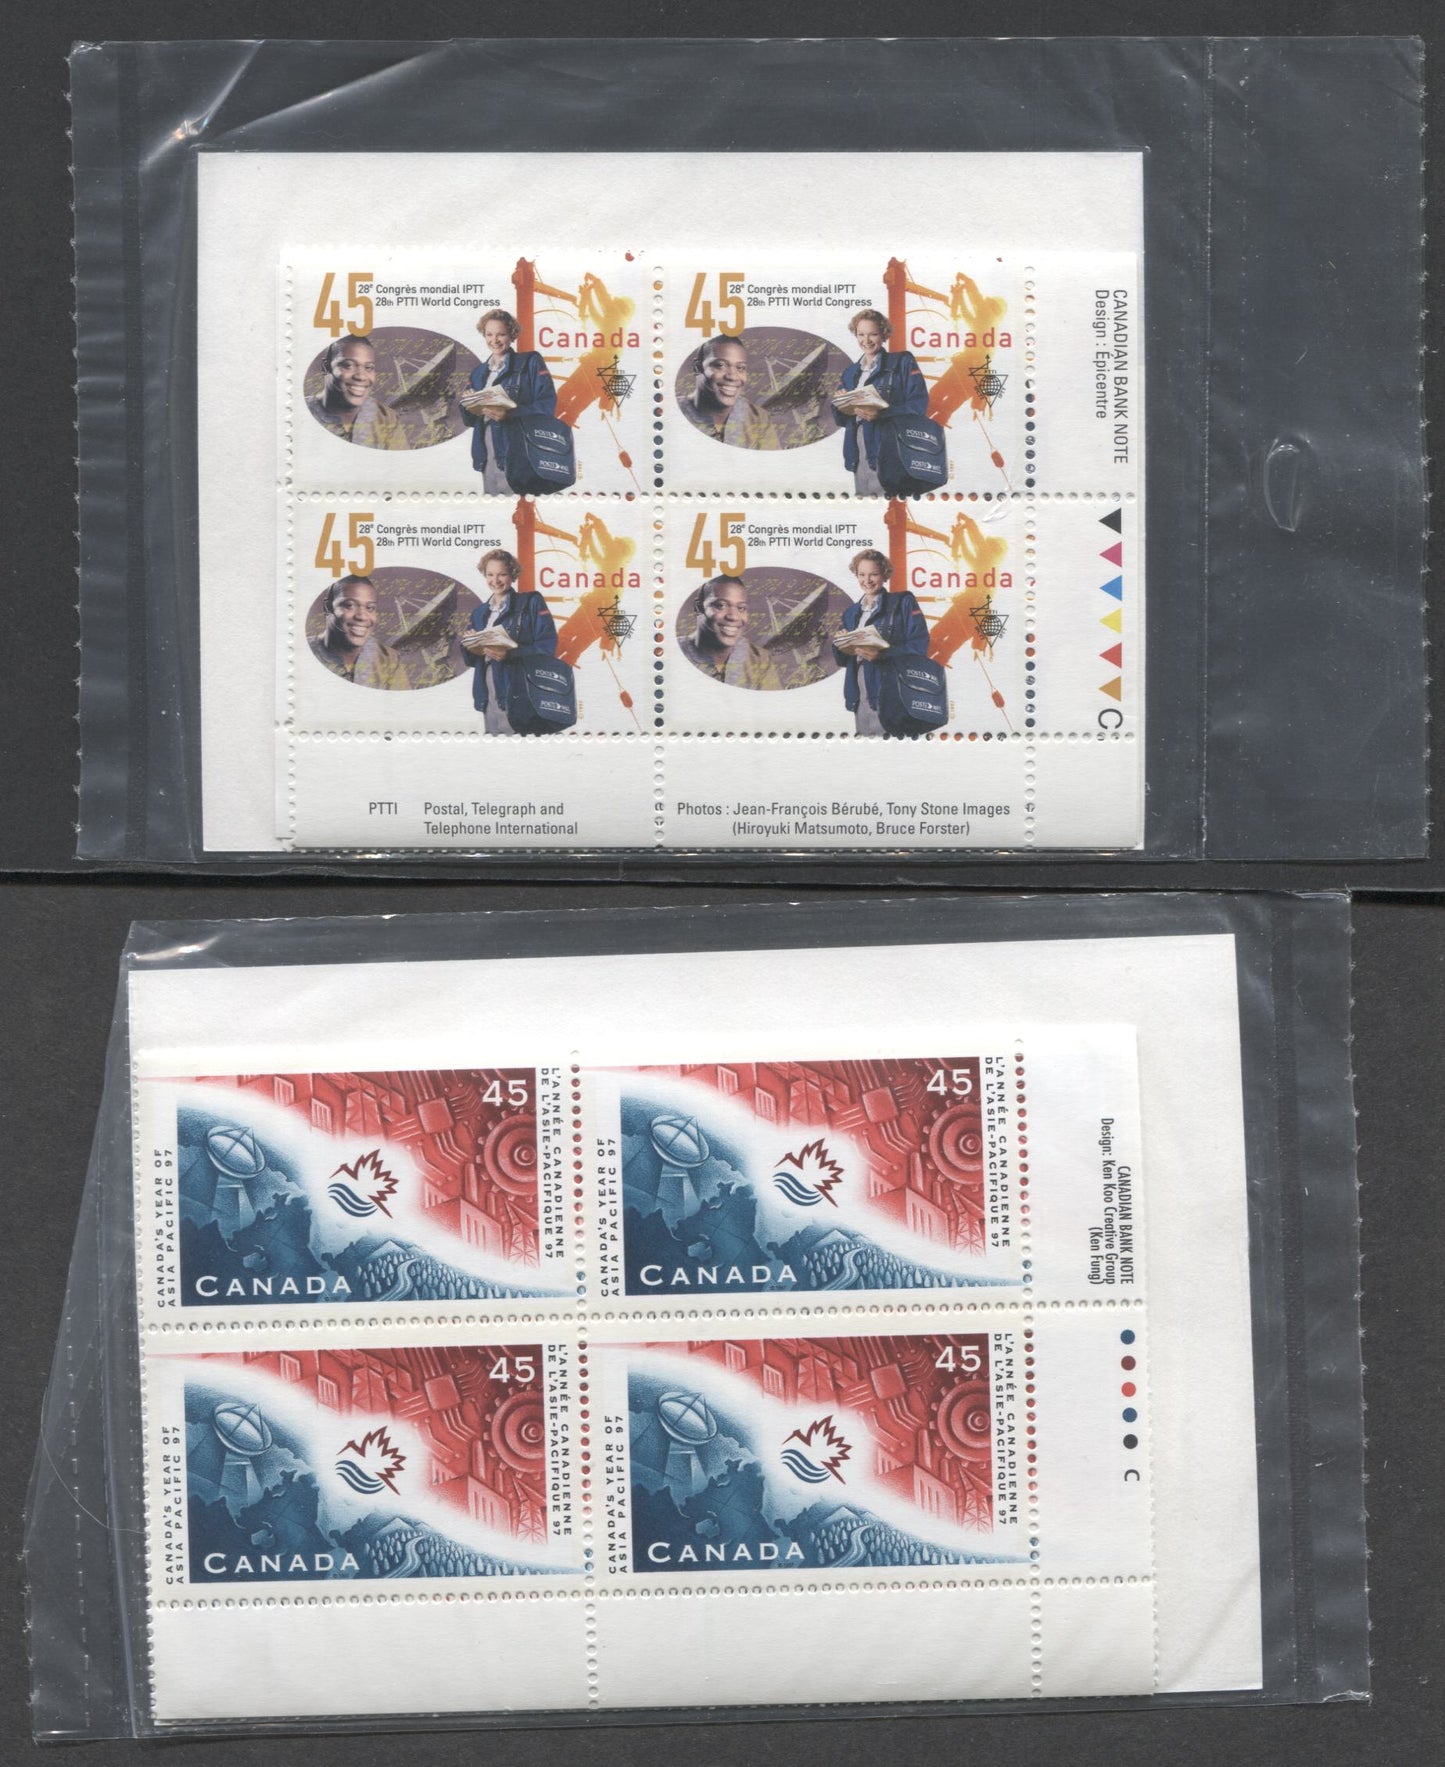 Lot 317 Canada #1657-1658 45c Multicolored 1997 World Congress Of The PTTI Labour Union, Canada's Year Of Asia Pacific Issues, Sealed Pack Of Corner Inscription Blocks on GT4 Coated Paper, With HB Type 6A Insert Card, VFNH, Unitrade Cat. $36